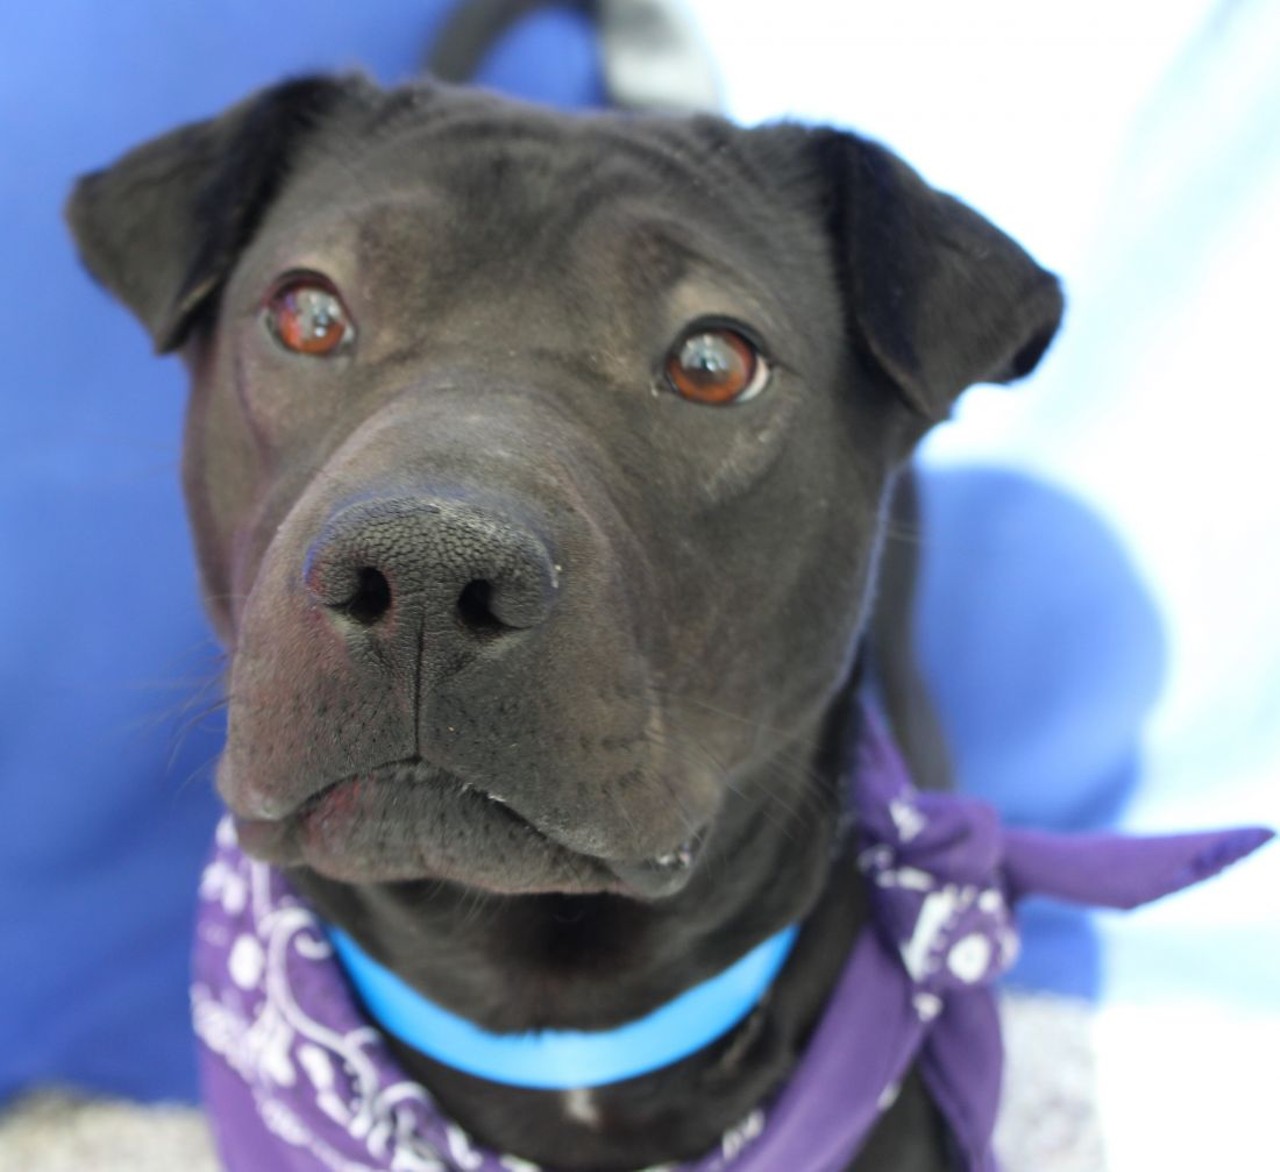 NAME: Piglet
GENDER: Male
BREED: Labrador Retriever-Shar Pei mix
AGE: 4 years
WEIGHT: 35 pounds
SPECIAL CONSIDERATIONS: None
REASON I CAME TO MHS: Agency transfer
LOCATION: Mackey Center for Animal Care in Detroit
ID NUMBER: 864036